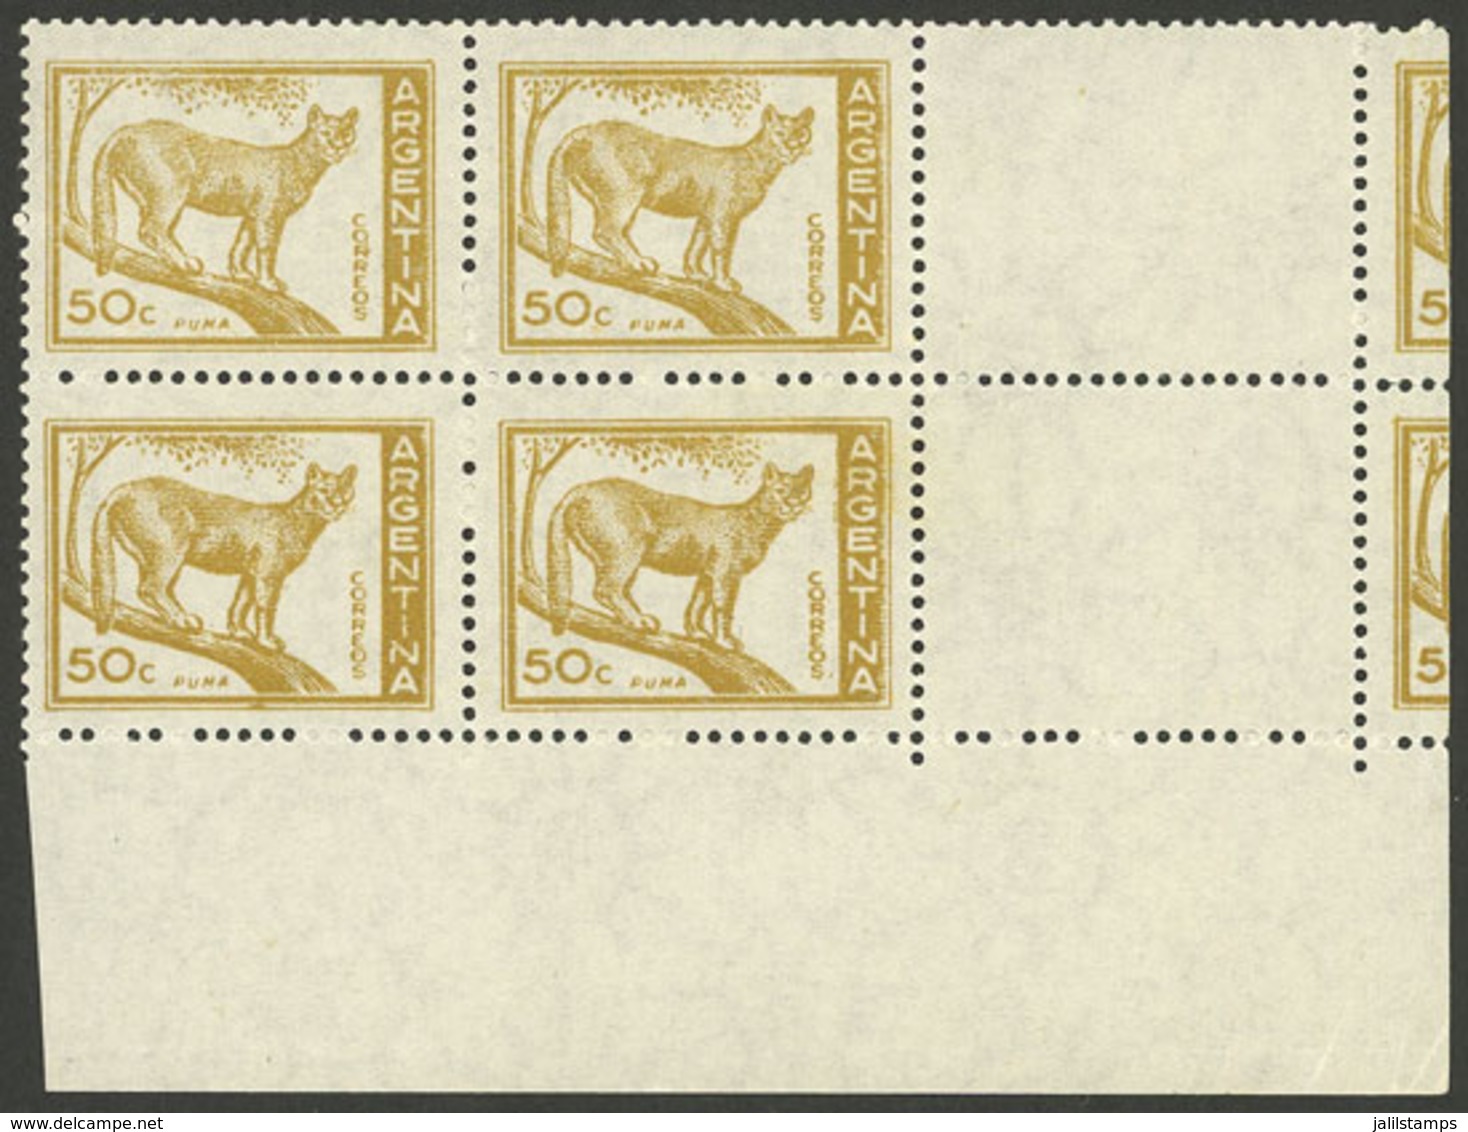 ARGENTINA: GJ.1125CD, 50c. Puma Typographed, Block Of 4 WITH RIGHT LABELS, MNH, Not Catalogued, Extremely Rare! - Ungebraucht